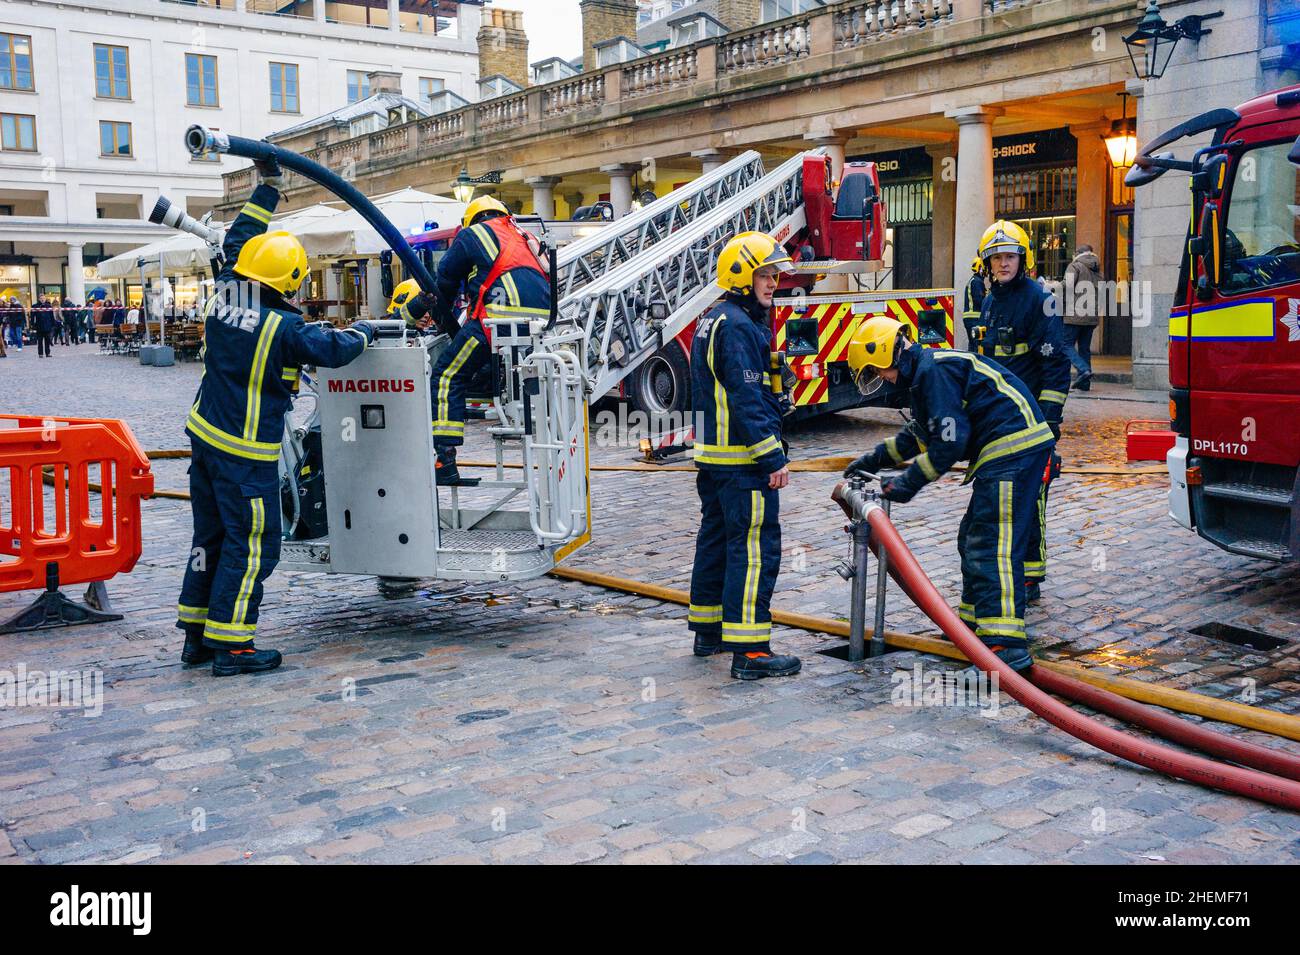 London fire brigade pack up after an emergency call out in Covent Garden, London. Stock Photo